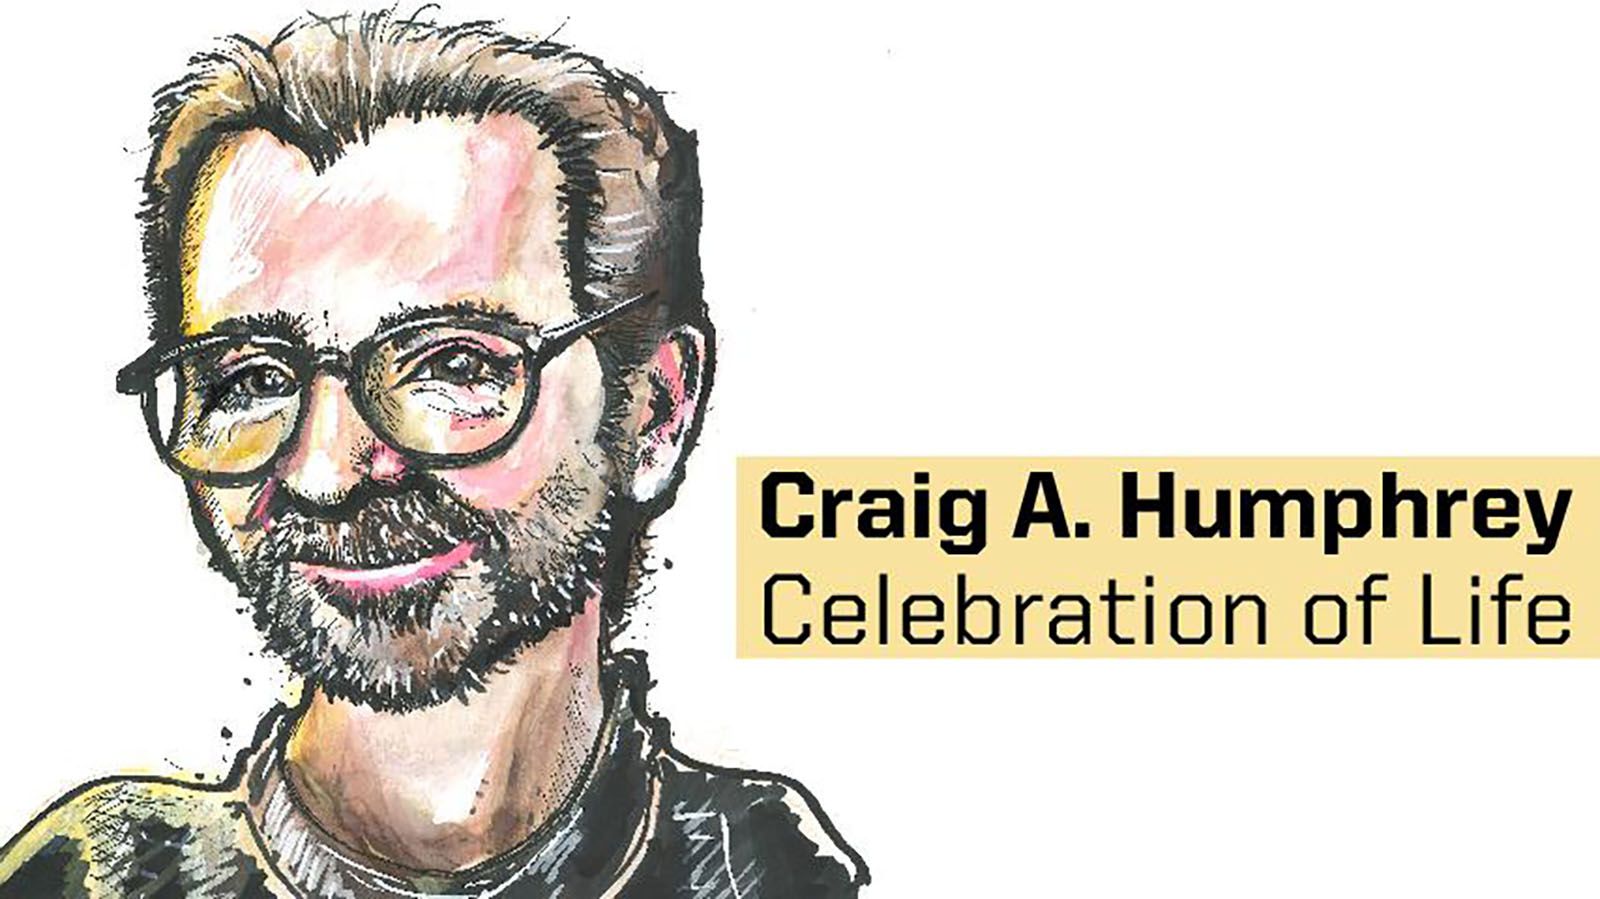 A Celebration of Life for Craig A. Humphrey will be Dec. 17 at Williams Theatre at PFW.